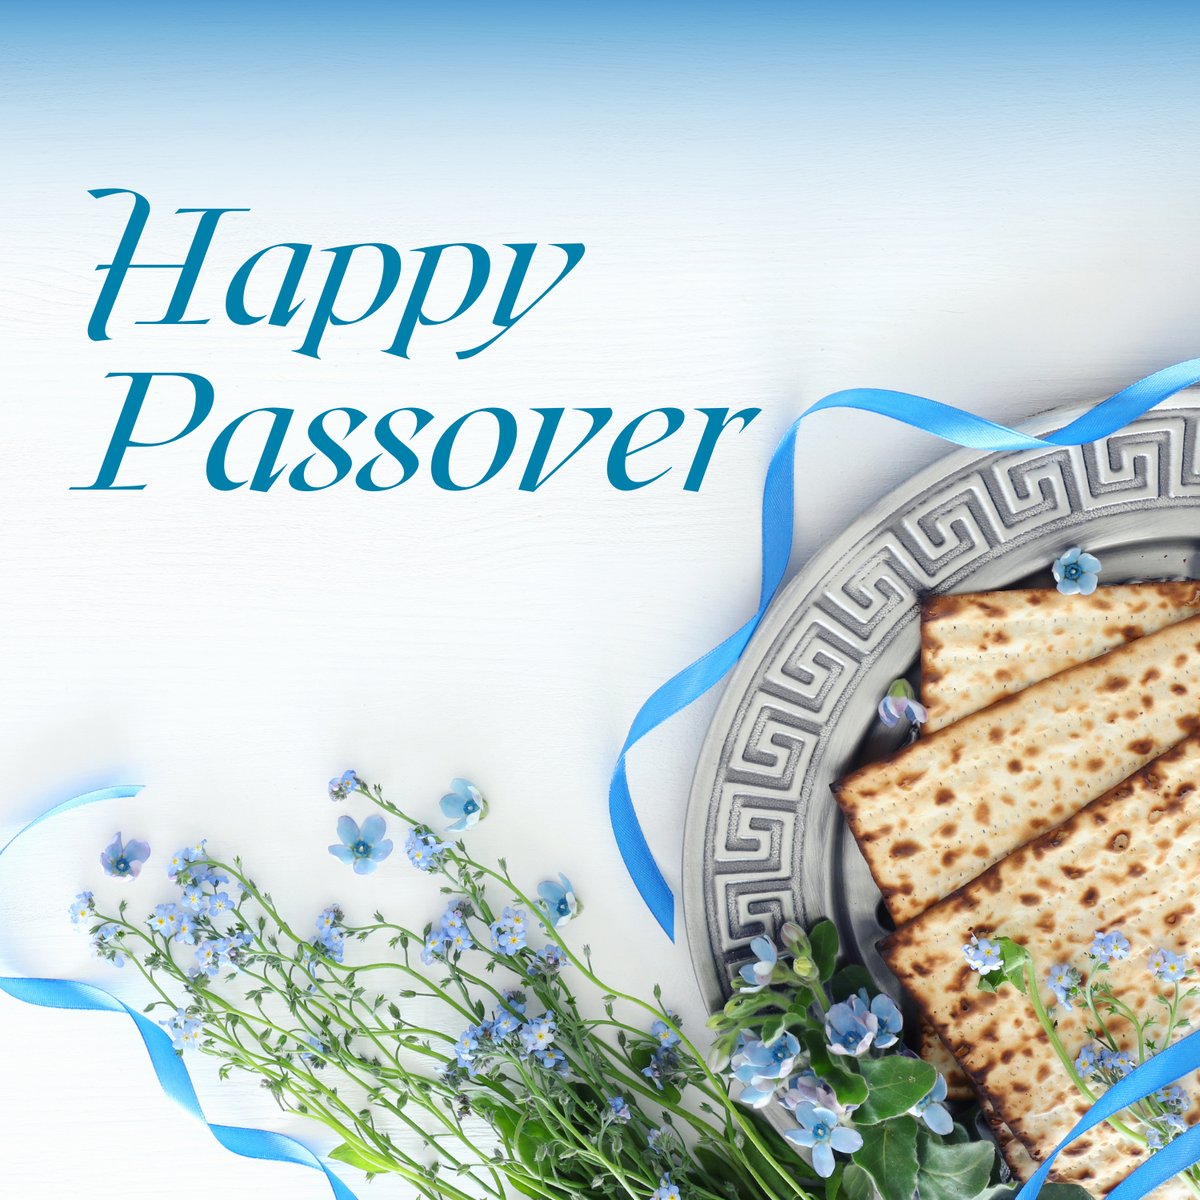 Tonight is the start of the eight days of Passover. I want to wish peace to all Jewish Albertans who are taking part in this celebration of faith and freedom with their families and loved ones. Chag Pesach kasher v'sameach!